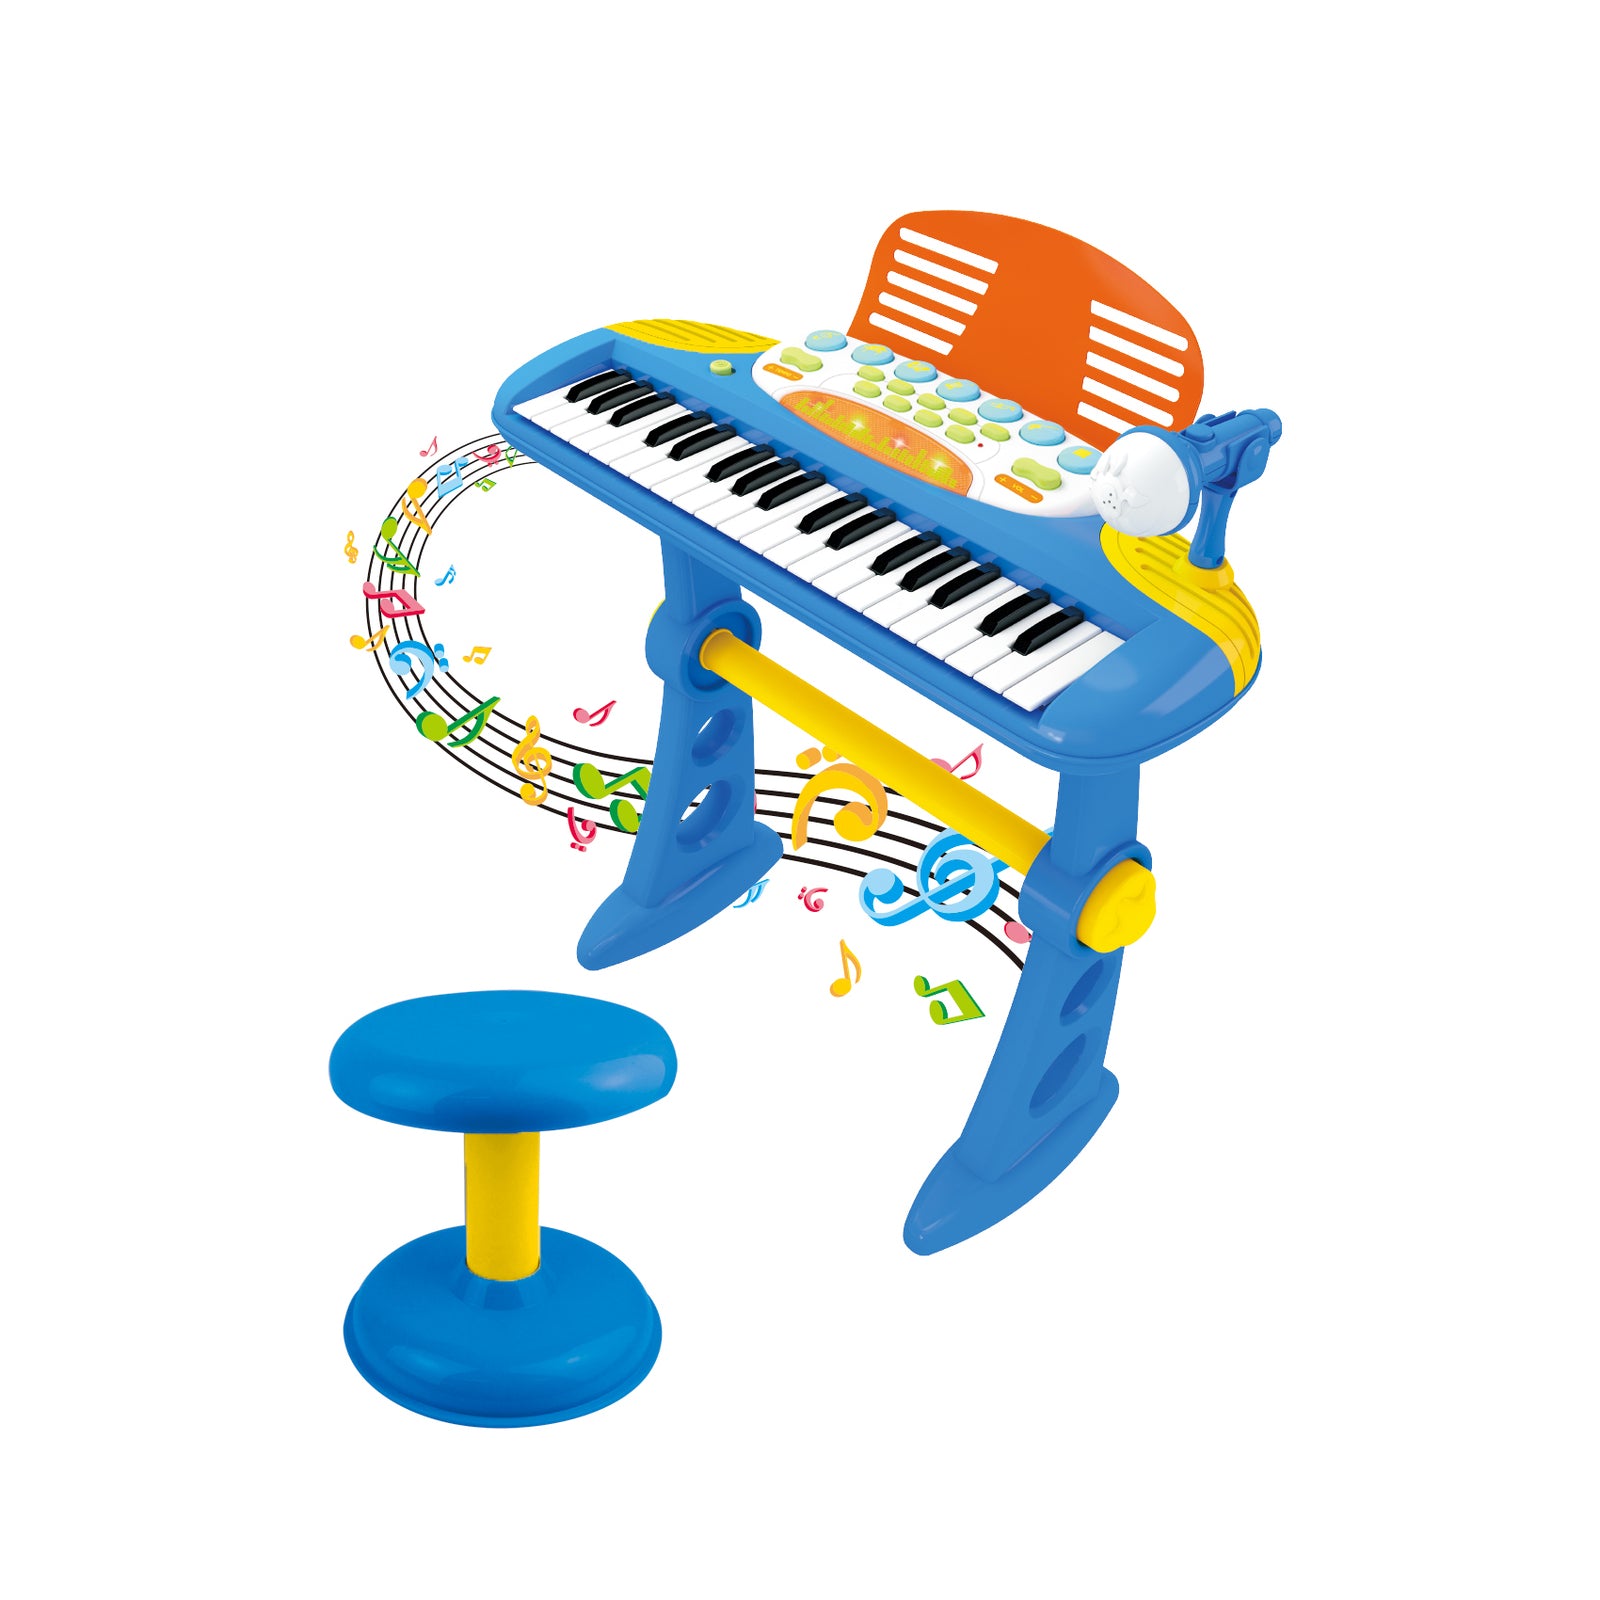 Children's Electronic Keyboard with Stand (Blue) Musical Instrument Toy - 0